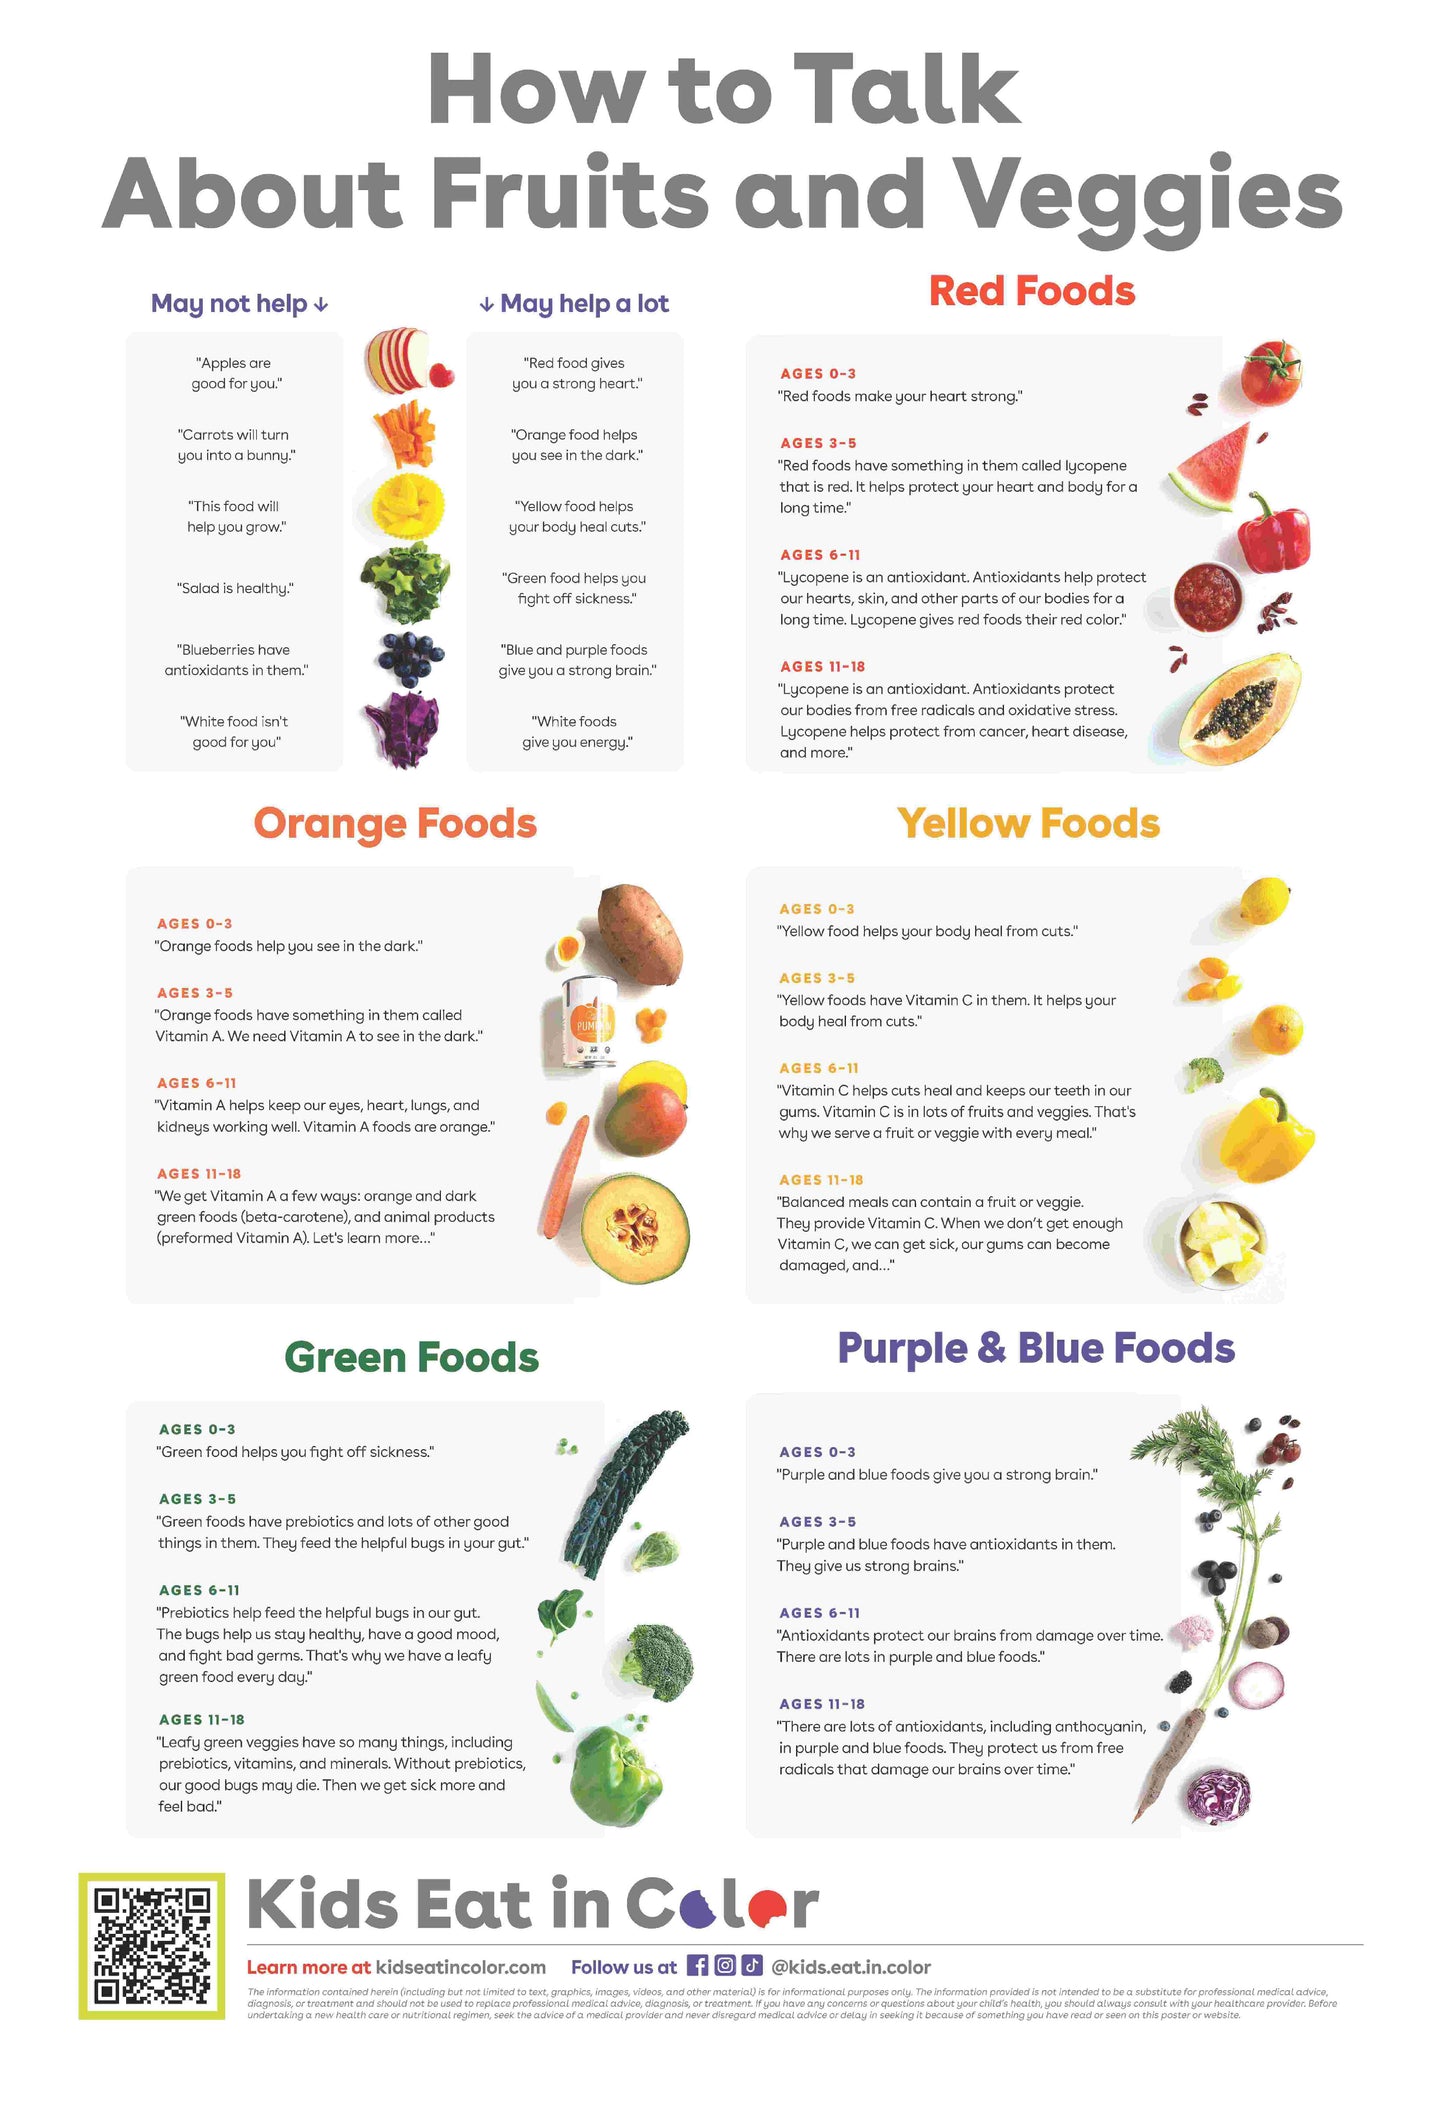 Kids Eat in Color - How to Talk About Fruits and Veggies Poster